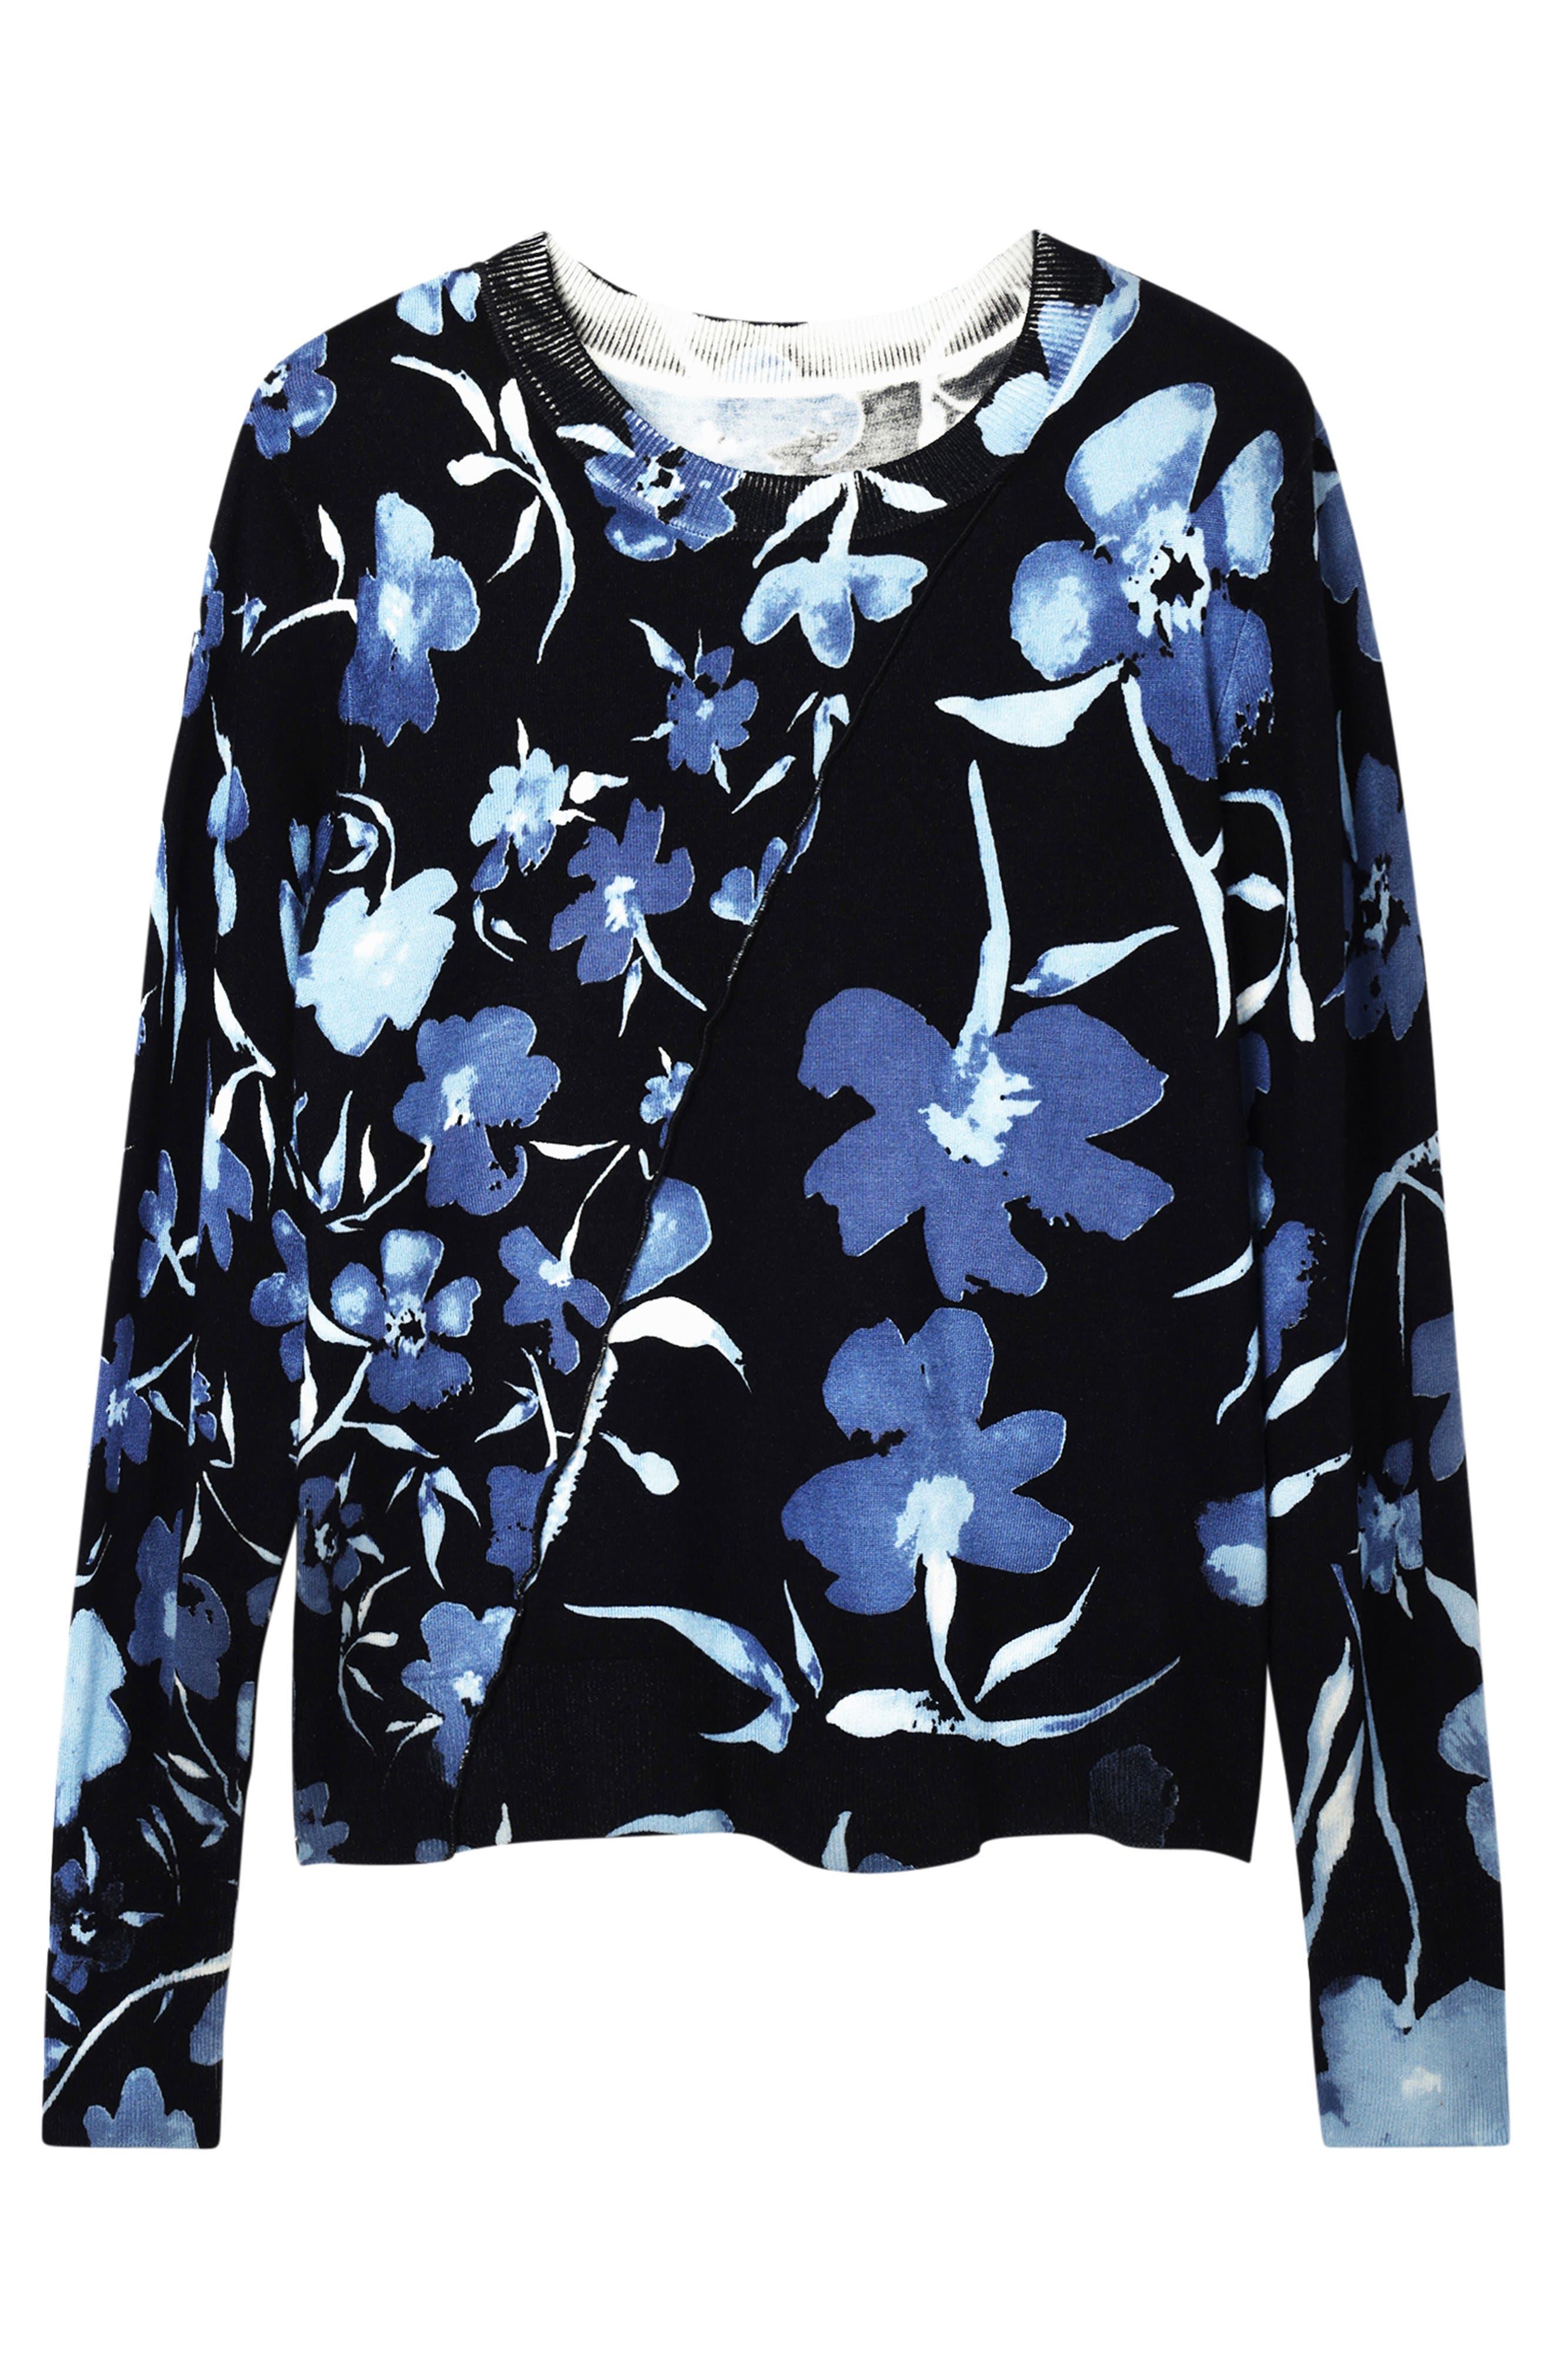 Desigual Jers Darky Floral Print Sweater in Black | Lyst